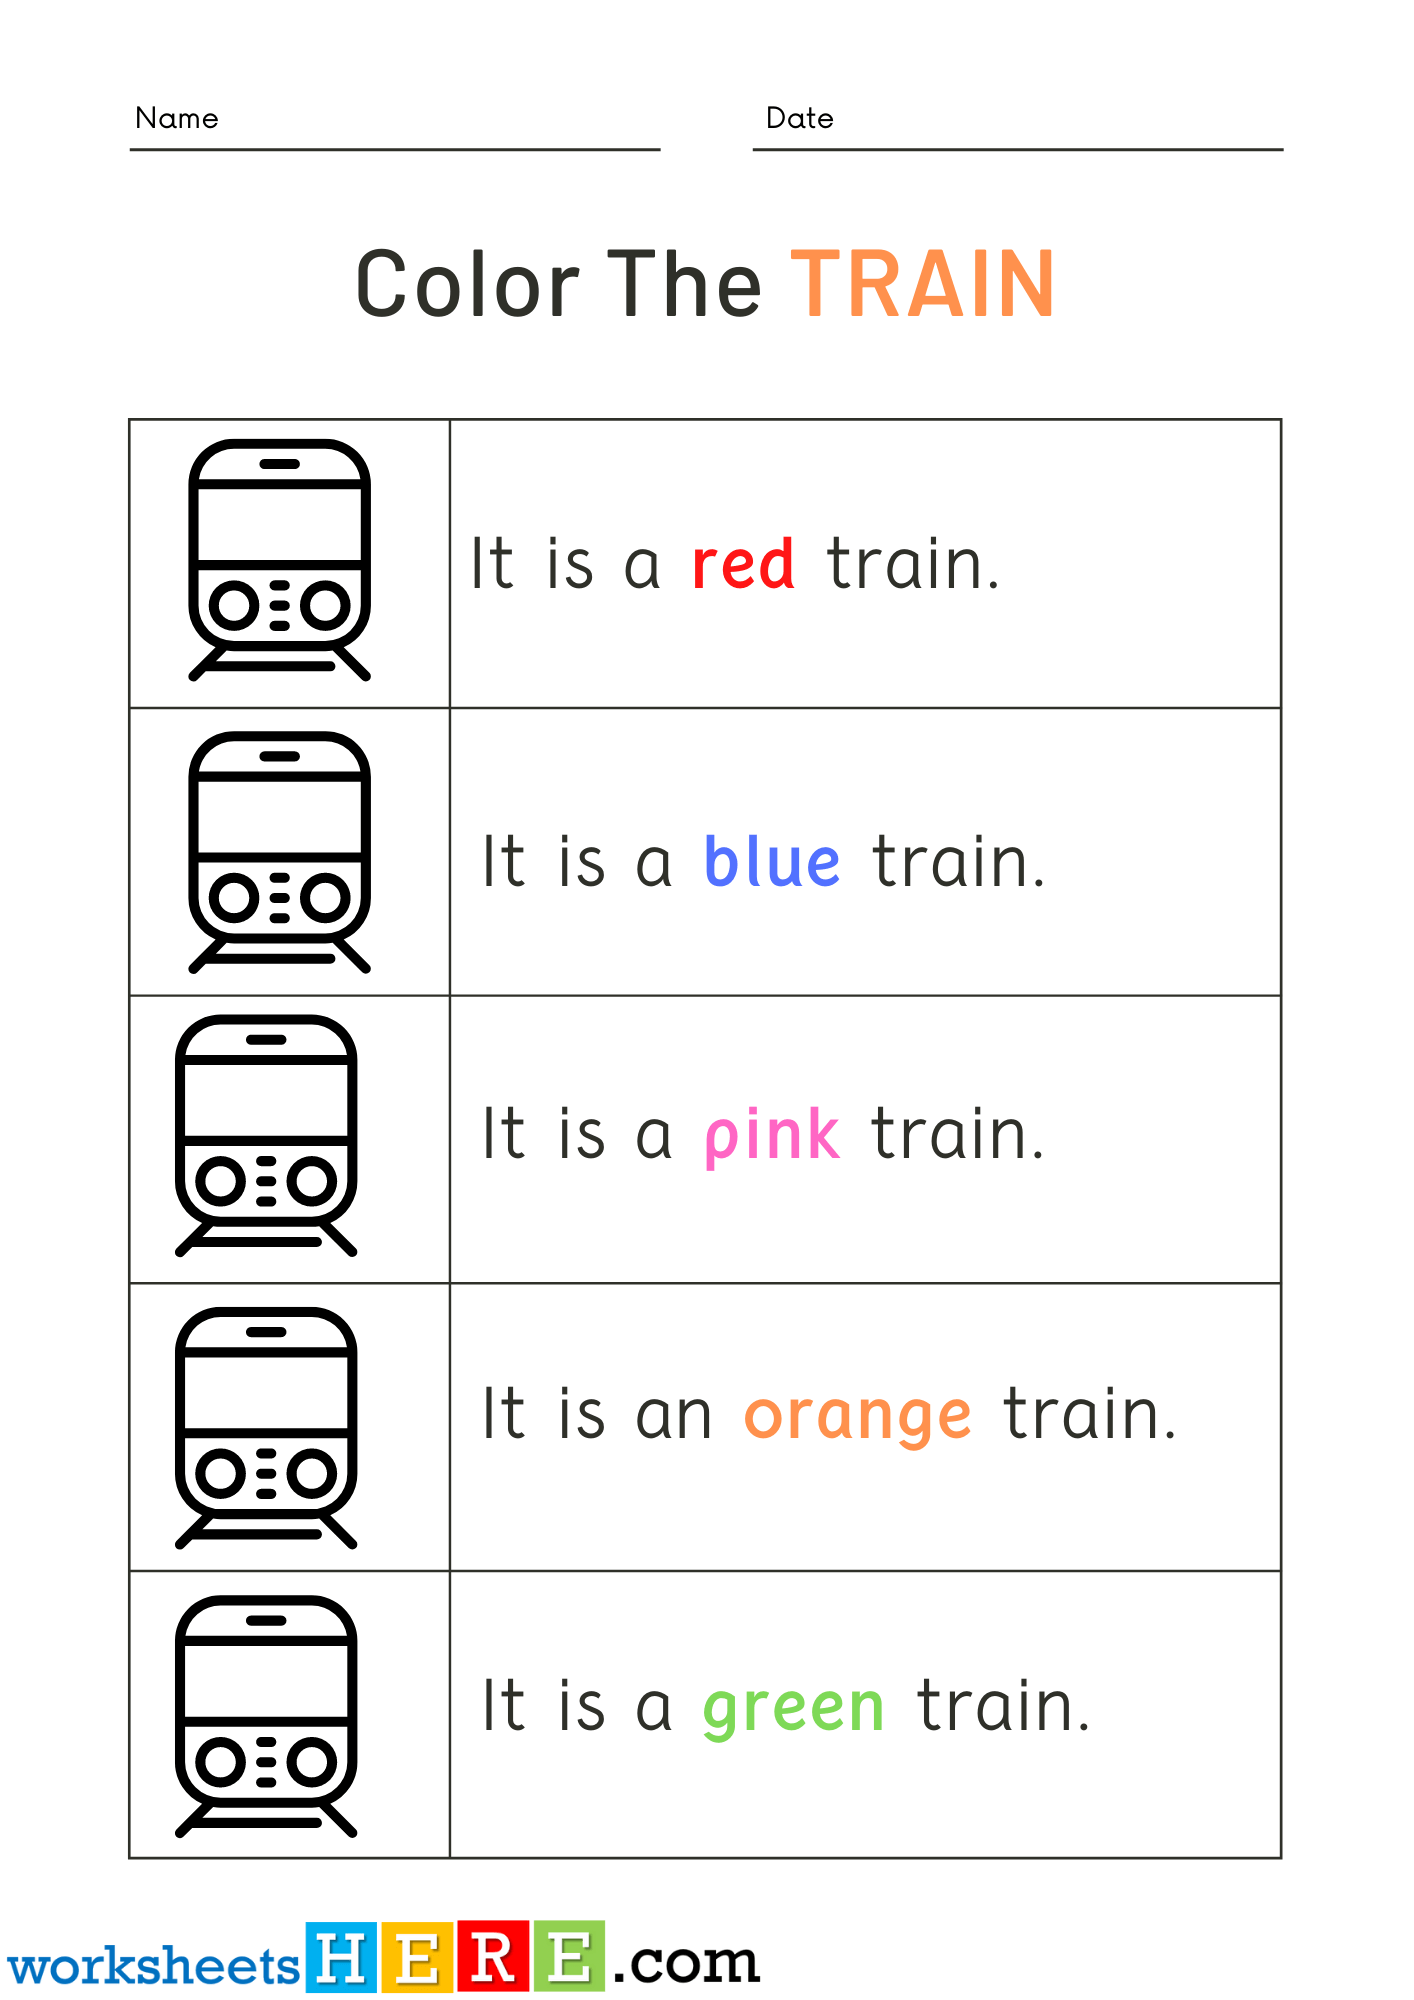 Read Words and Color Train Pictures Activity PDF Worksheets For Kindergarten